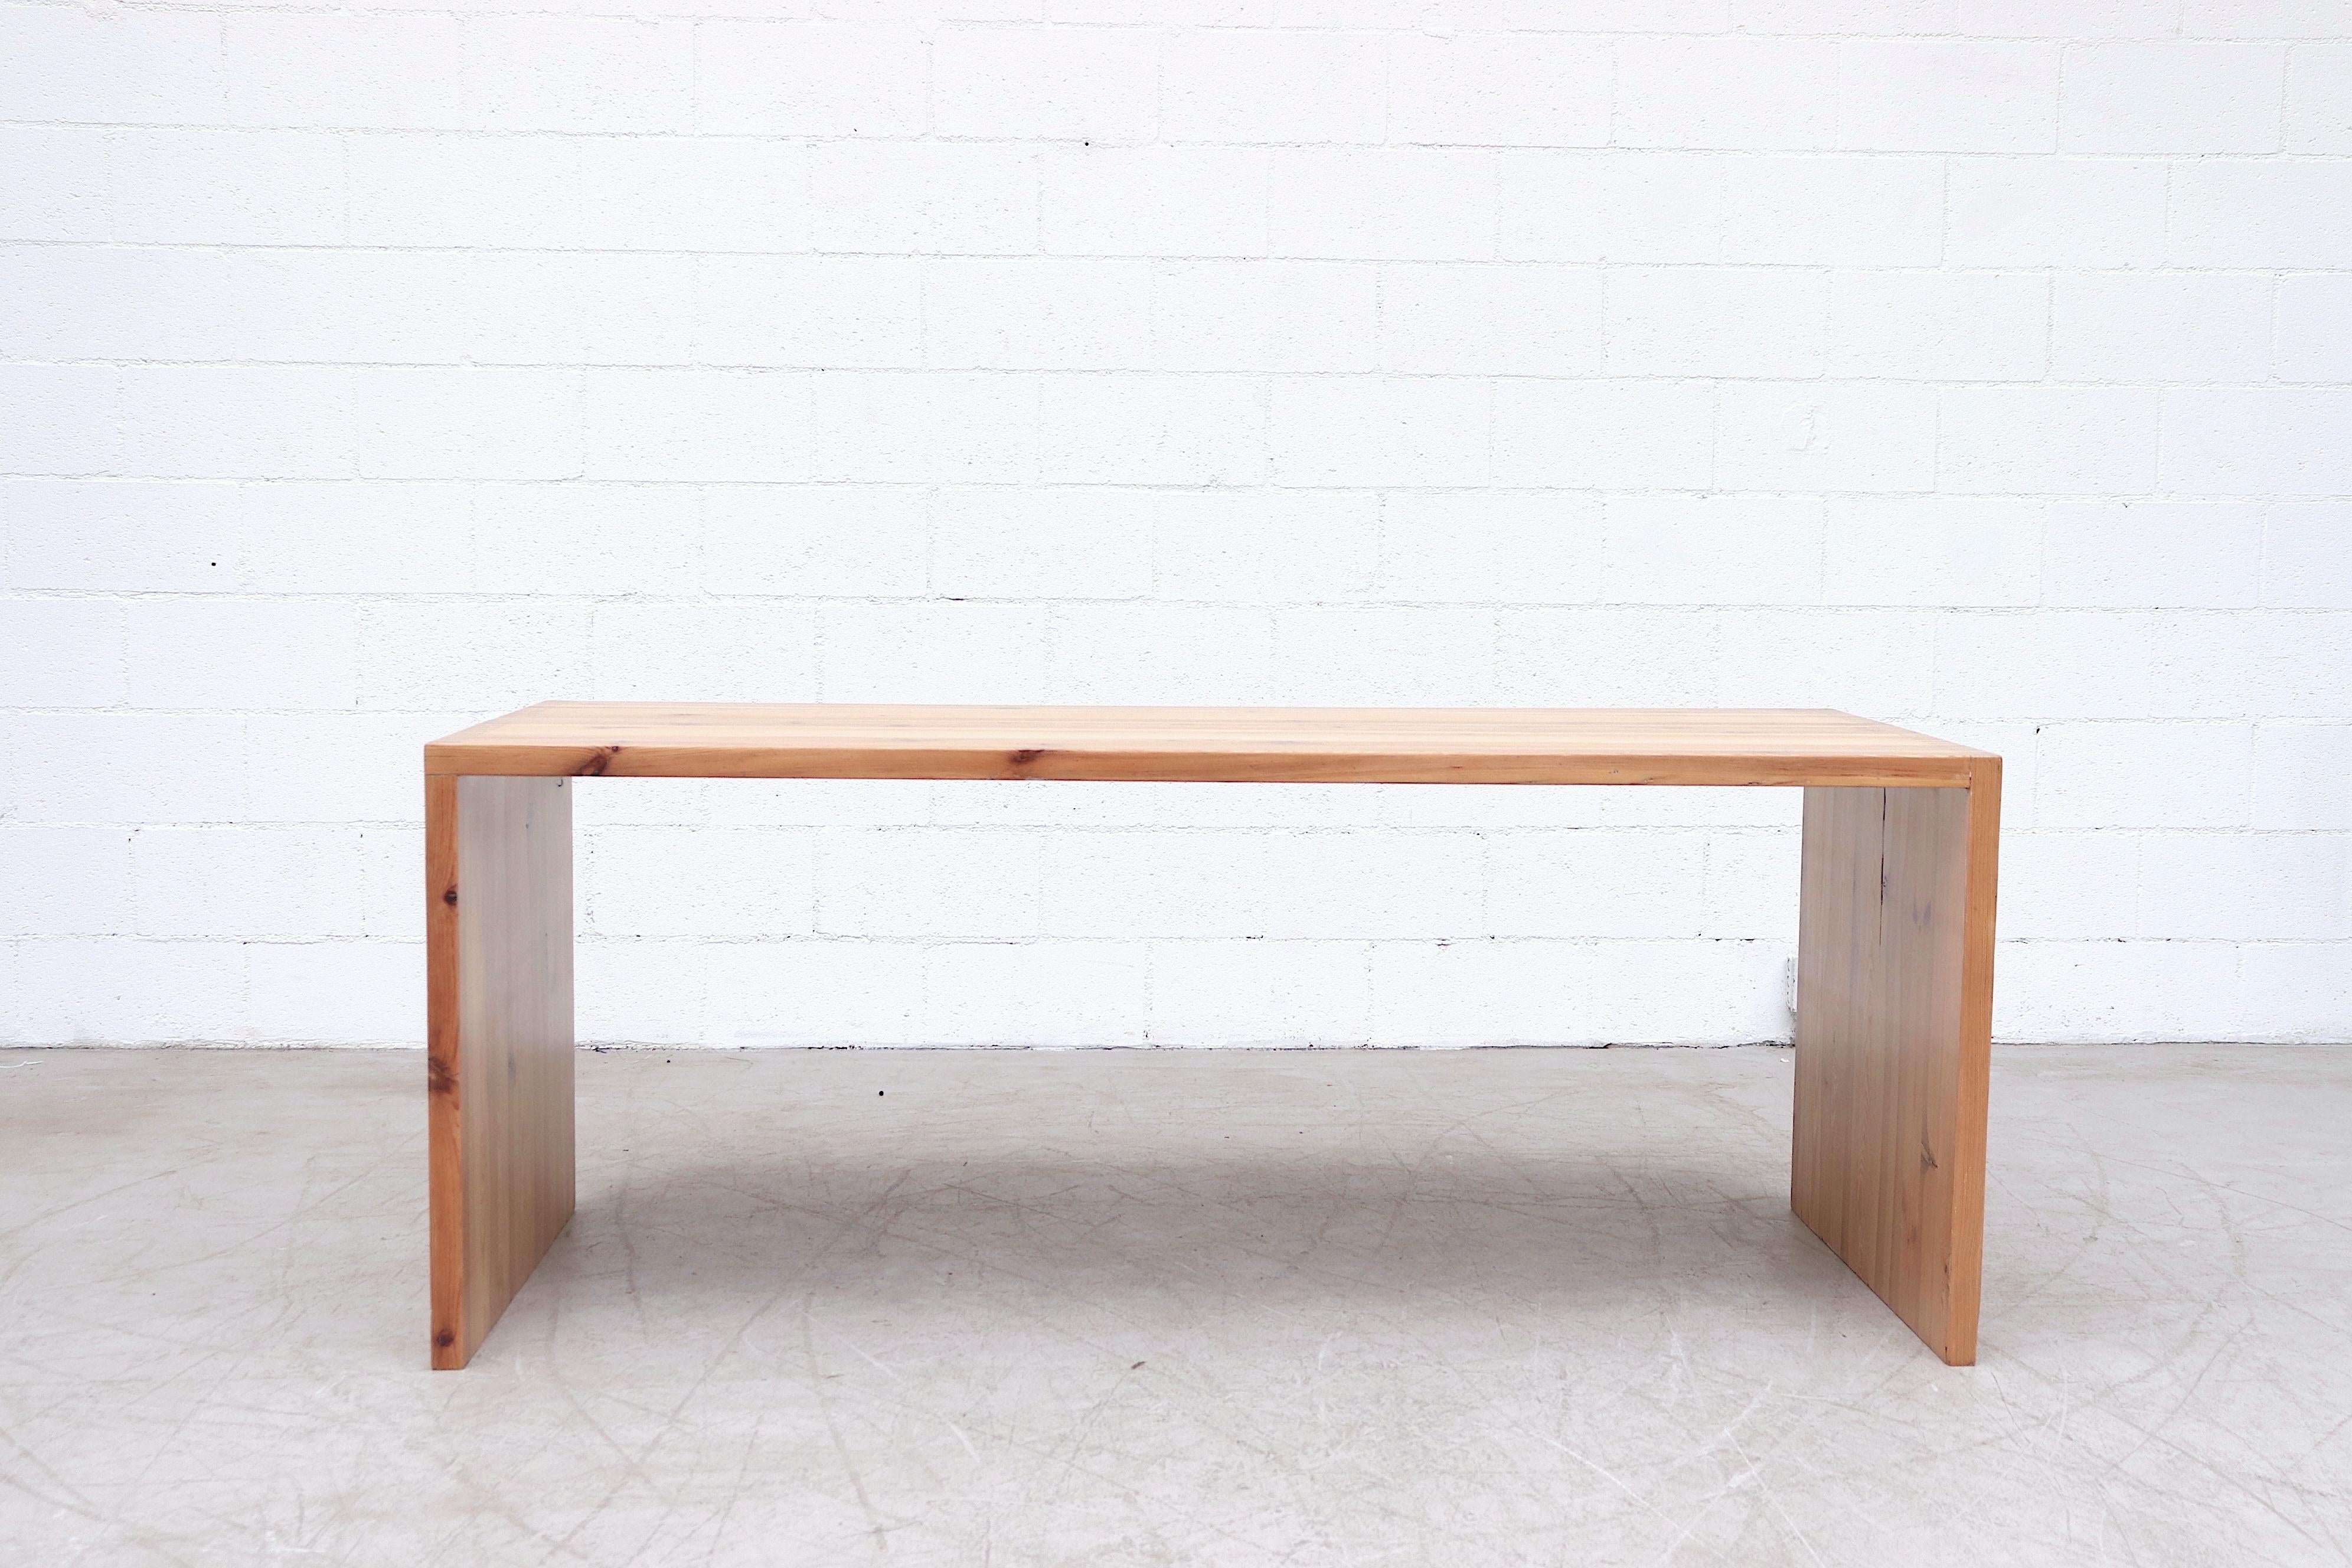 Minimalistic Ate Van Apeldoorn pine dining table or desk with box joints. Beautiful wood grain, lightly refinished in otherwise original condition with minimal wear.